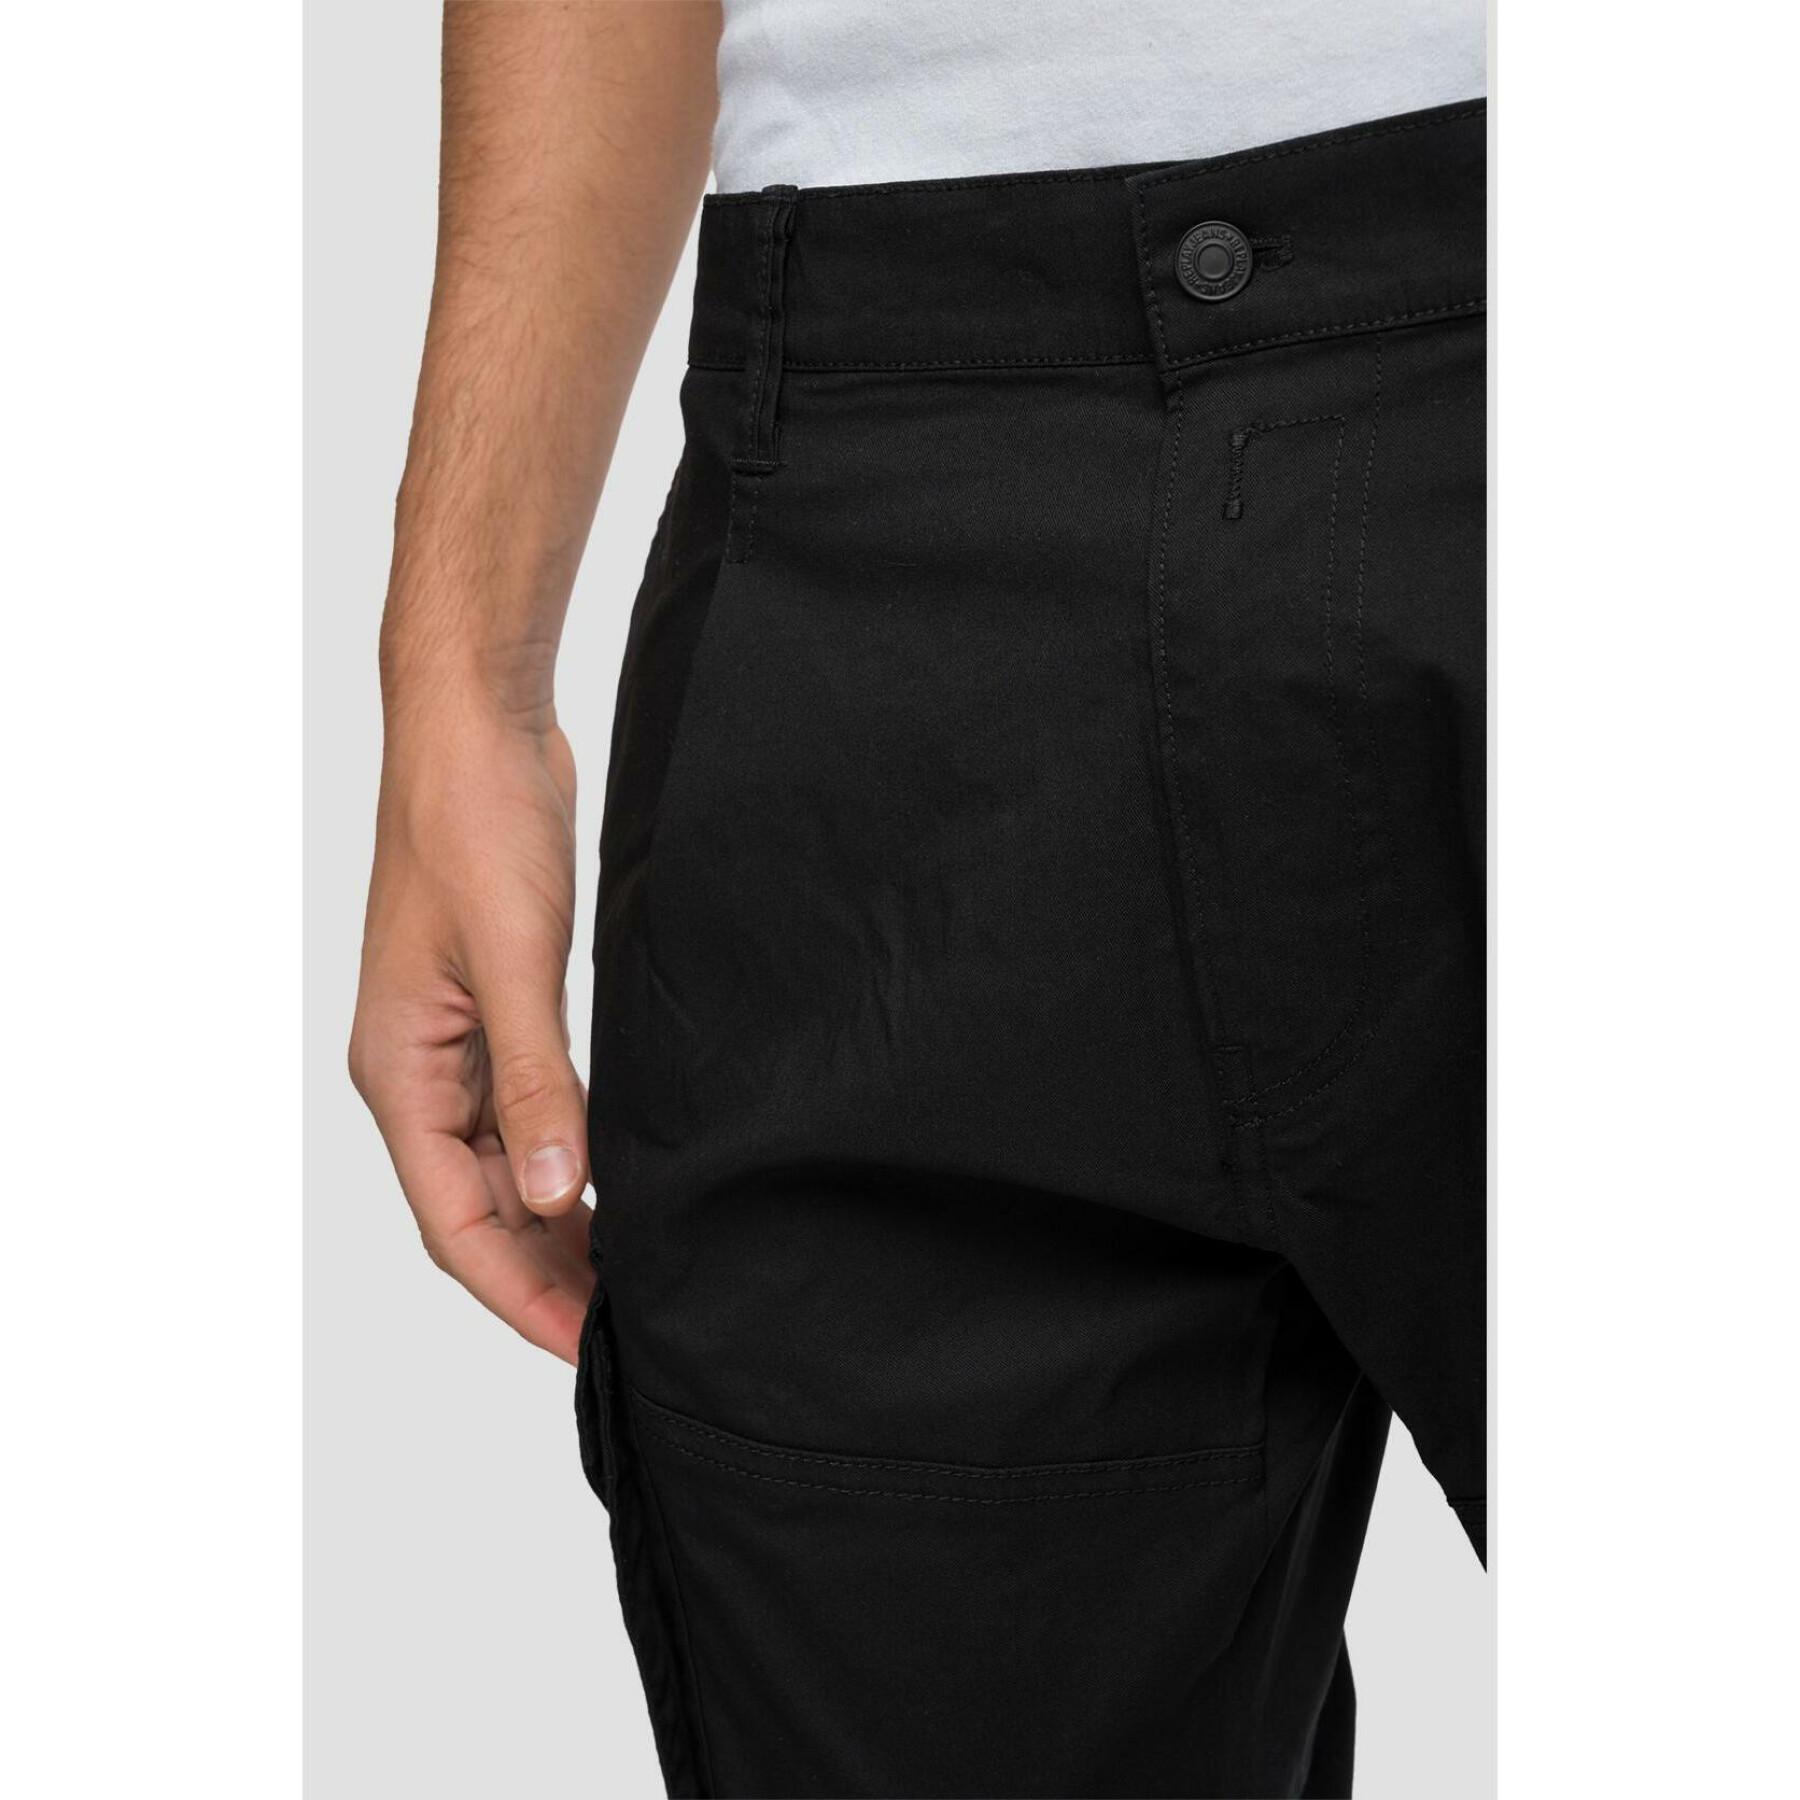 Comfort fit trousers Replay sniper